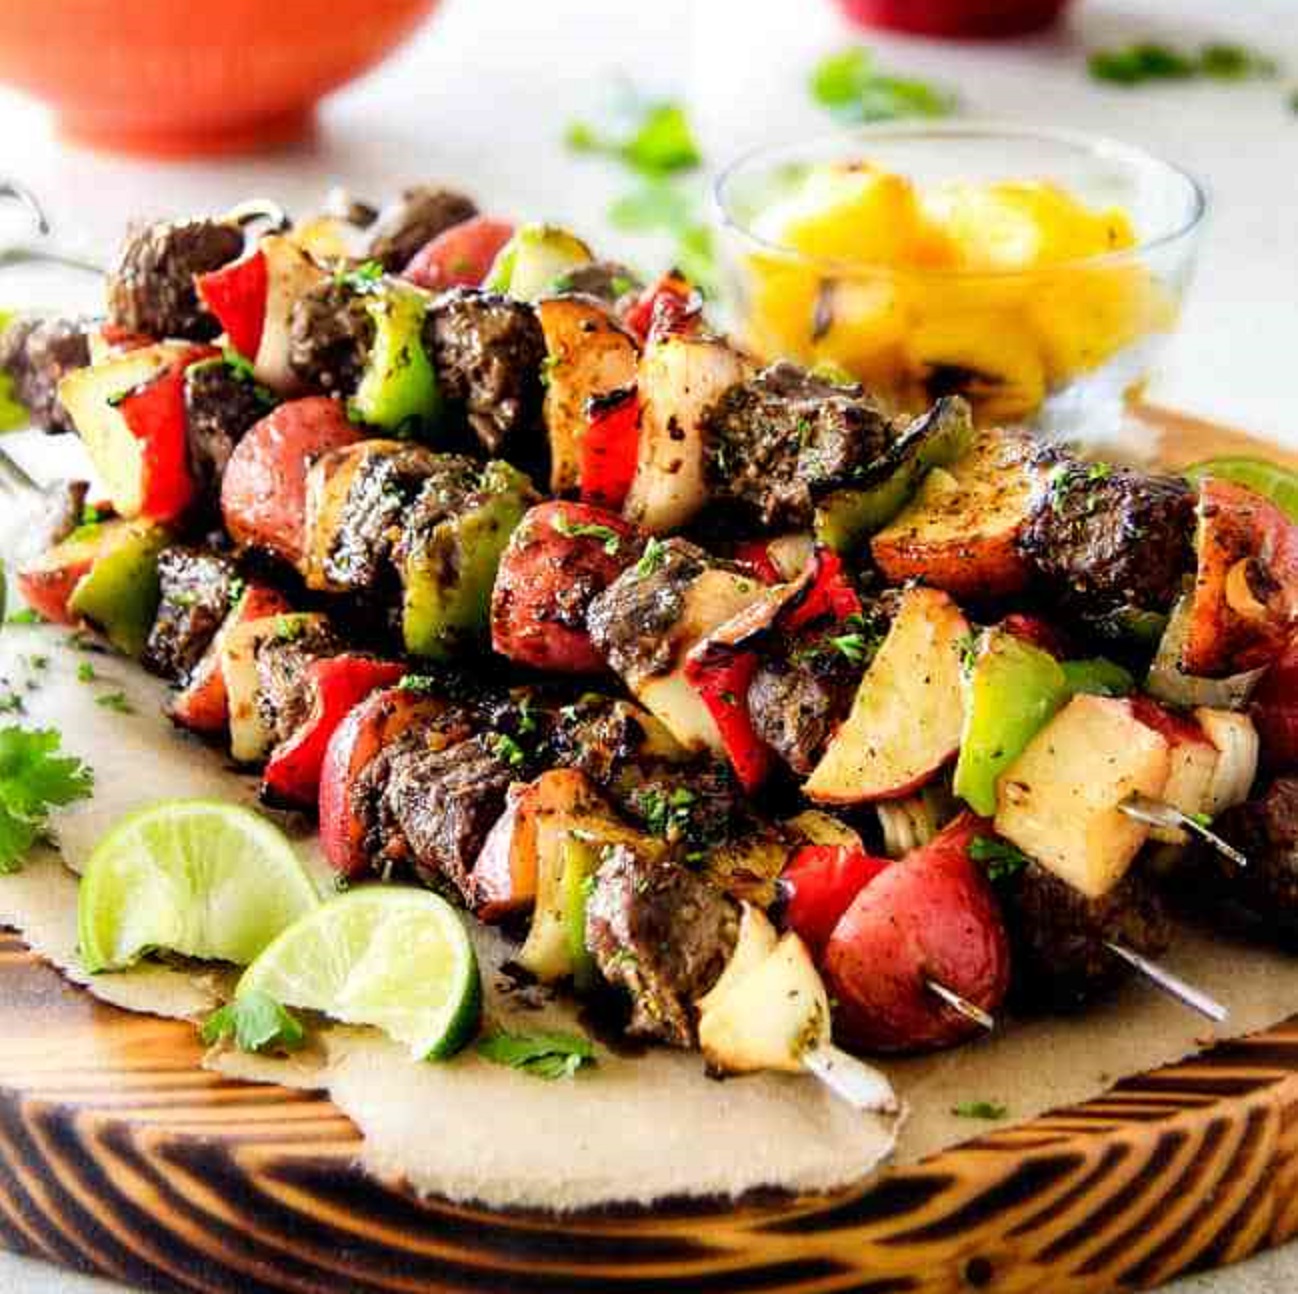 Jaw Droppingly Delicious Brazilian Steak Kabobs With Potatoes